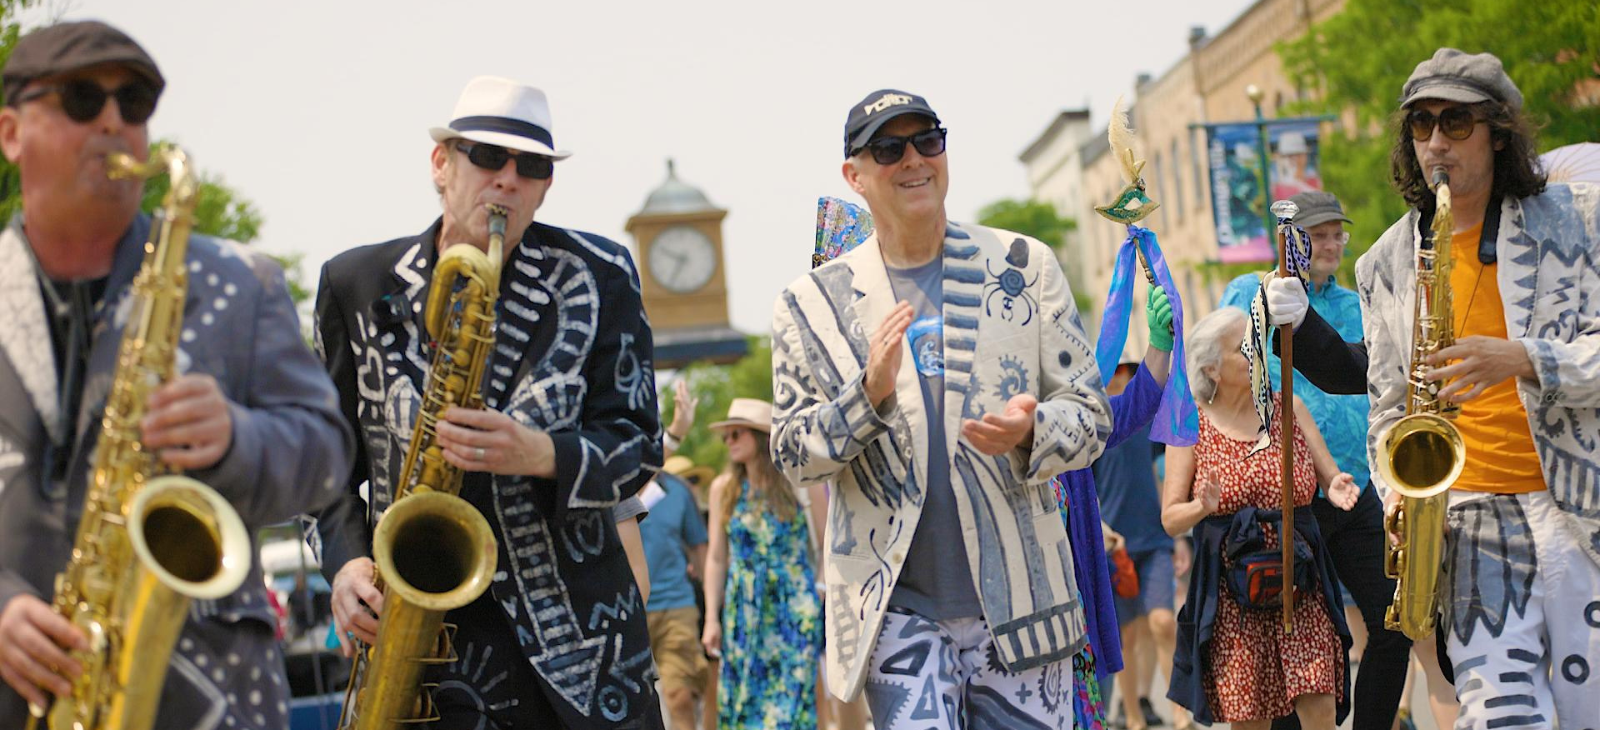 Three men in suits play saxophones and another man claps while they are marching in a parade.